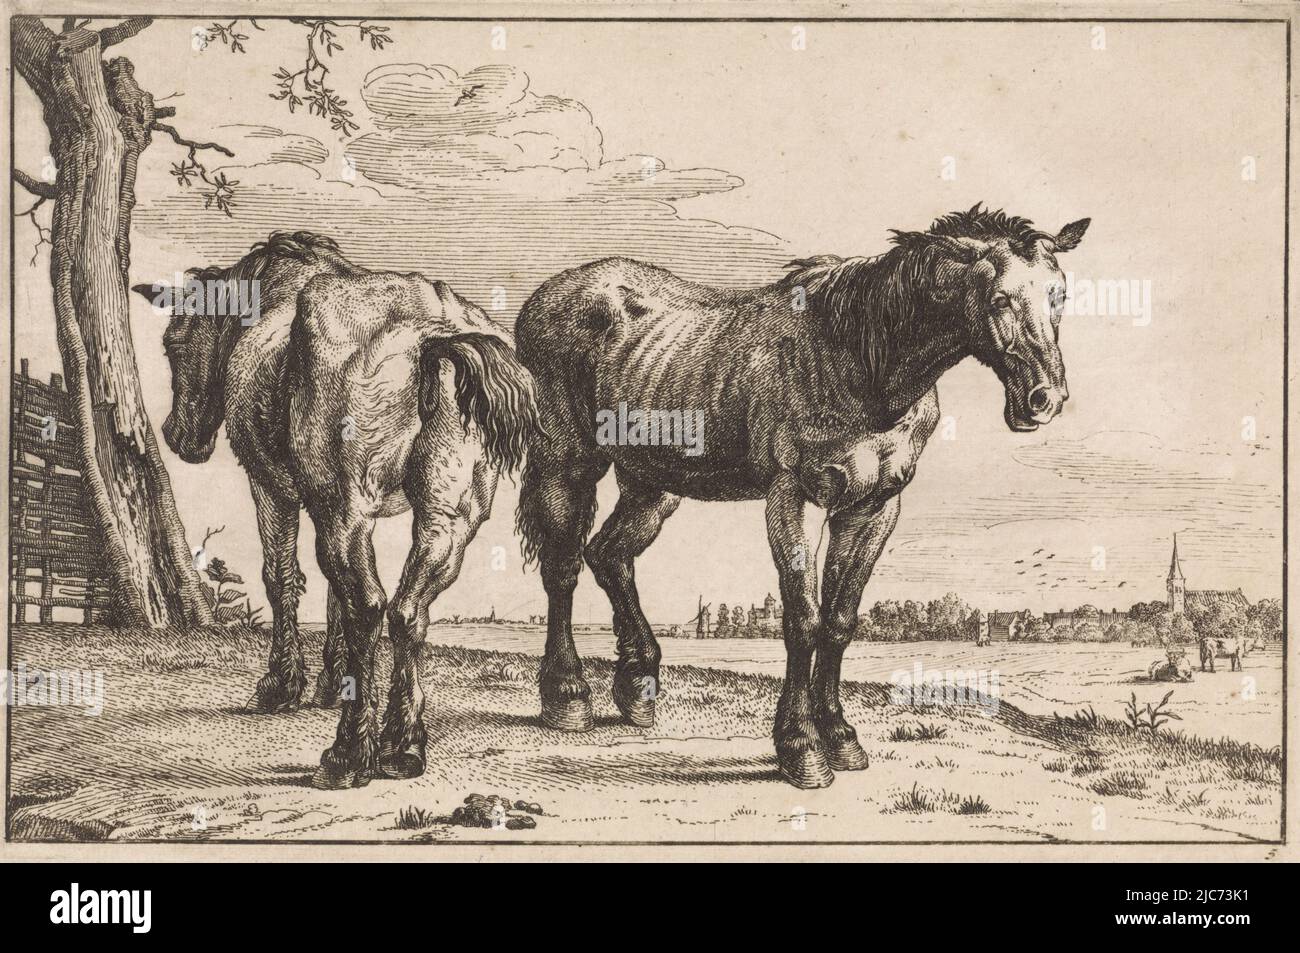 Two work horses standing near a tree in a landscape. Numbered bottom right: 5. Two plow horses Horses , Paulus Potter, print maker: anonymous, Netherlands, 1652 - 1702, paper, etching, h 142 mm × w 216 mm Stock Photo